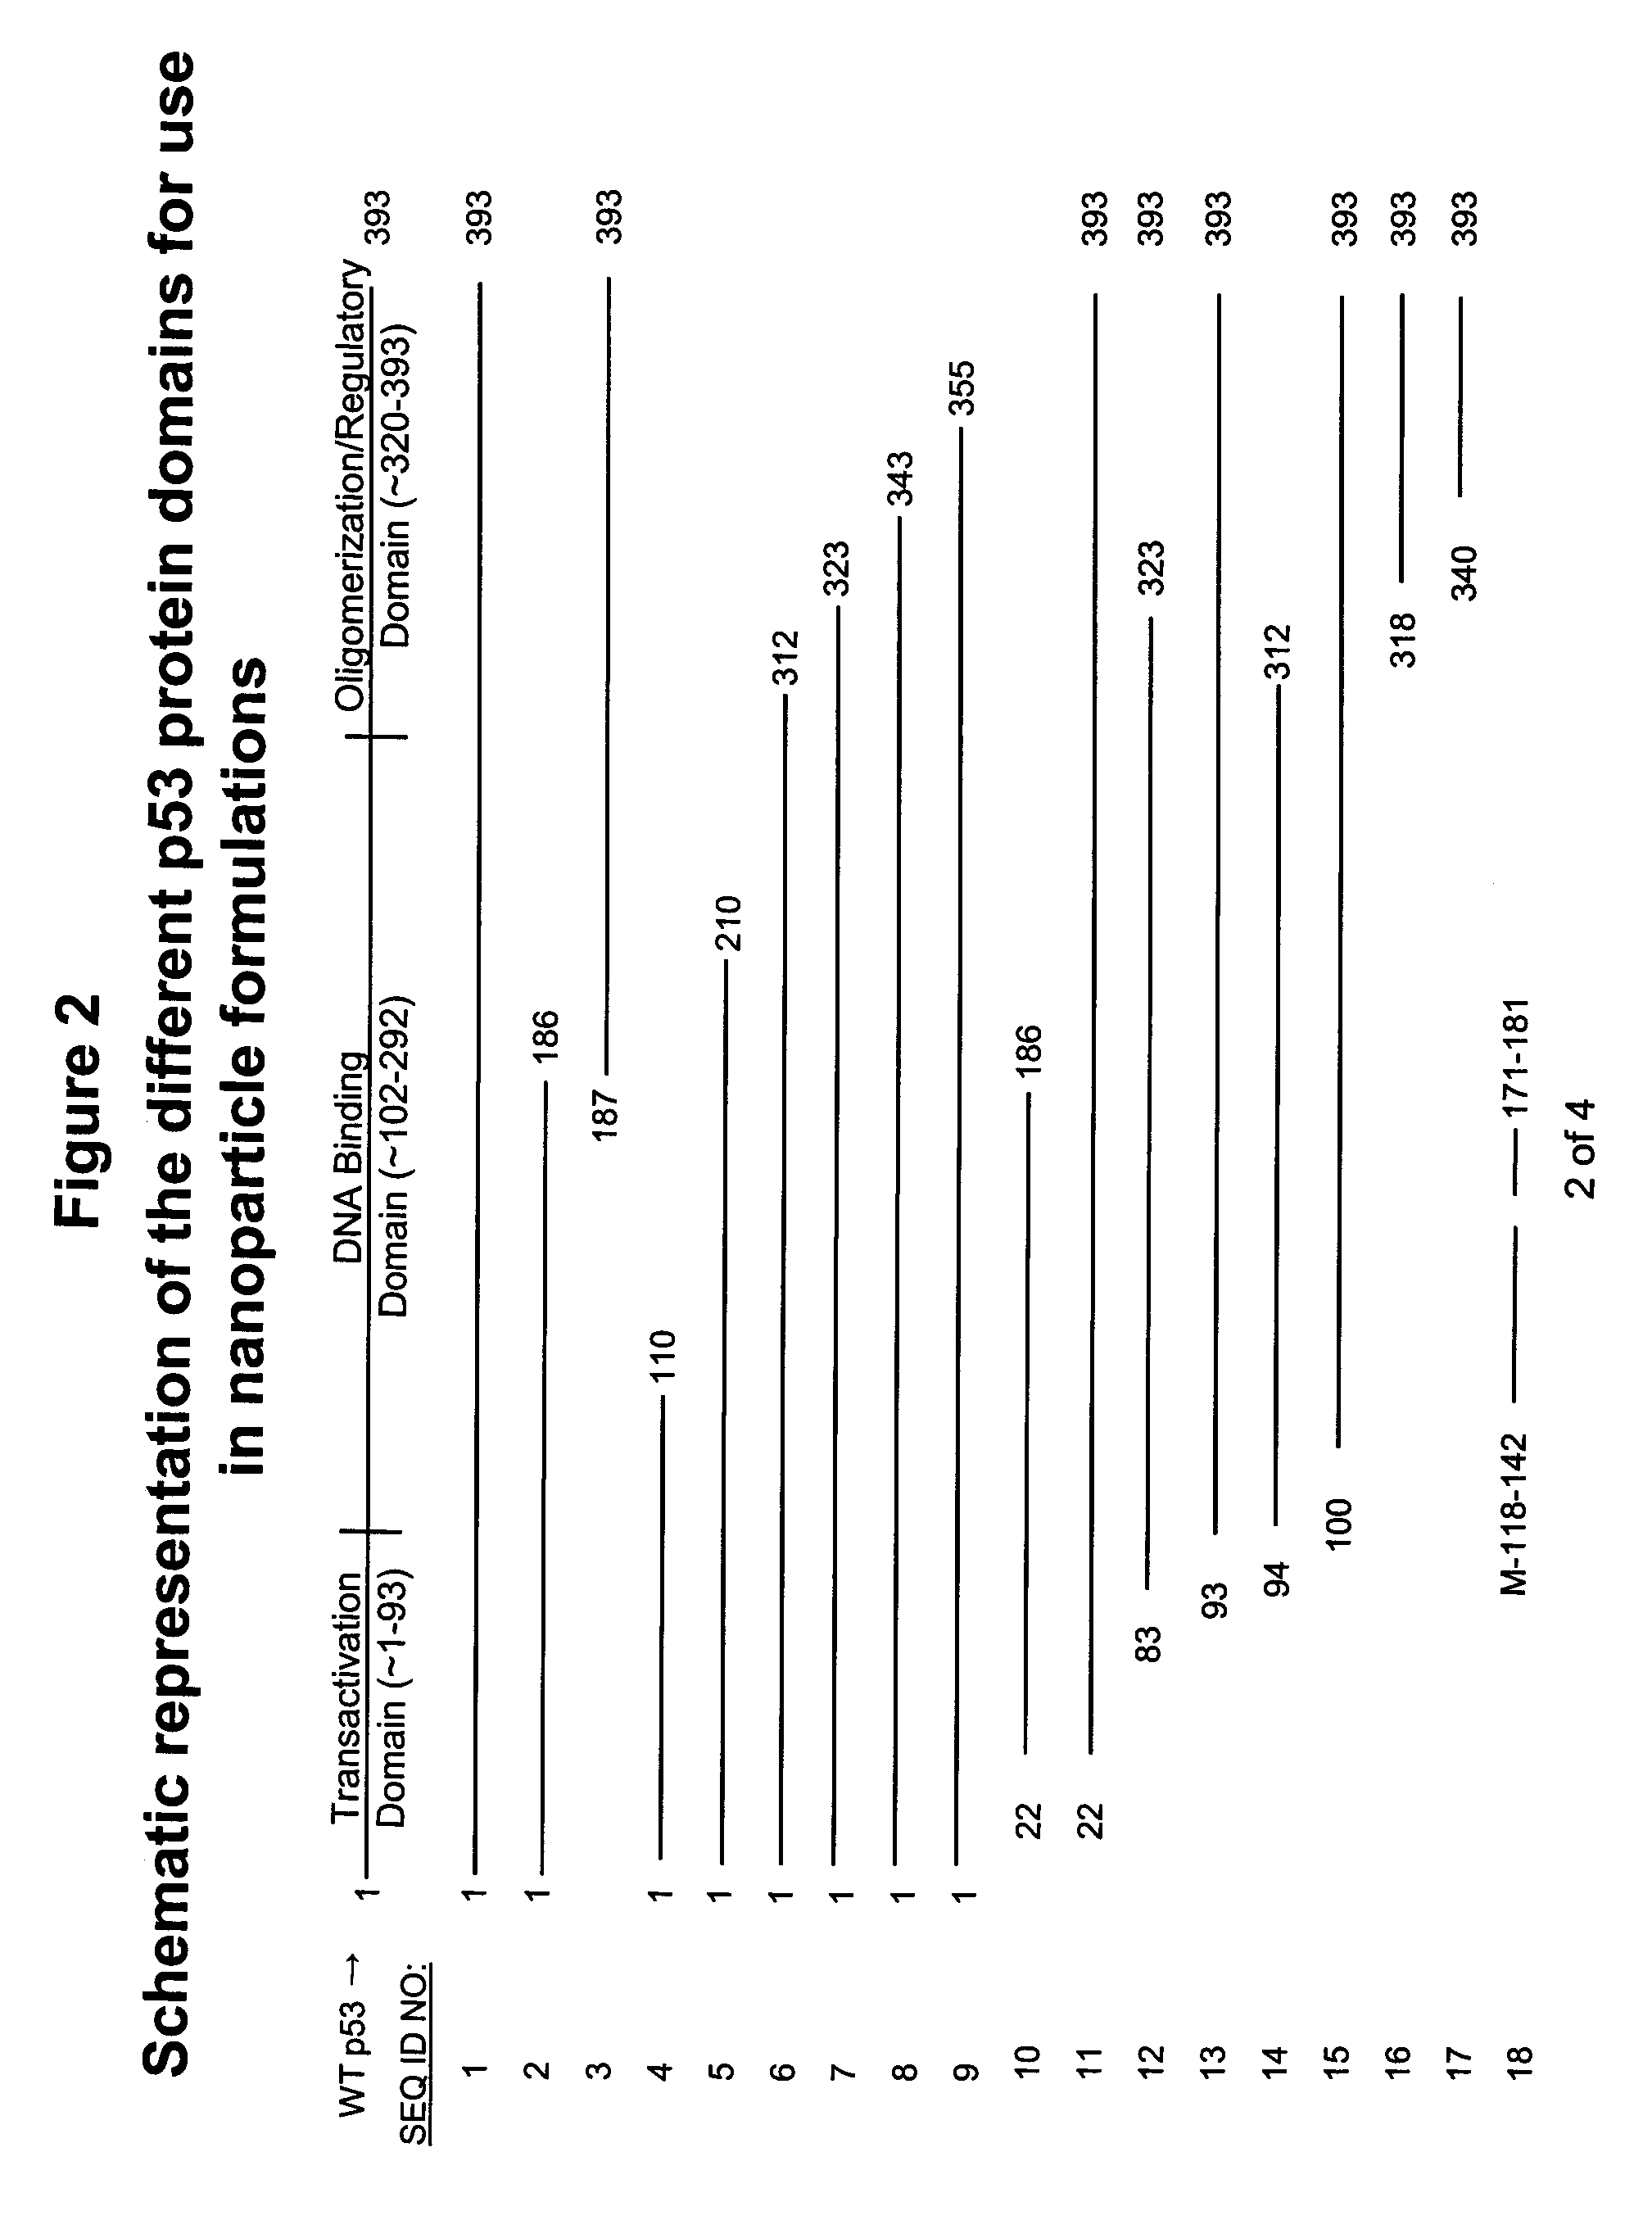 Apoptosis-Modulating Protein Therapy for Proliferative Disorders and Nanoparticles Containing the Same